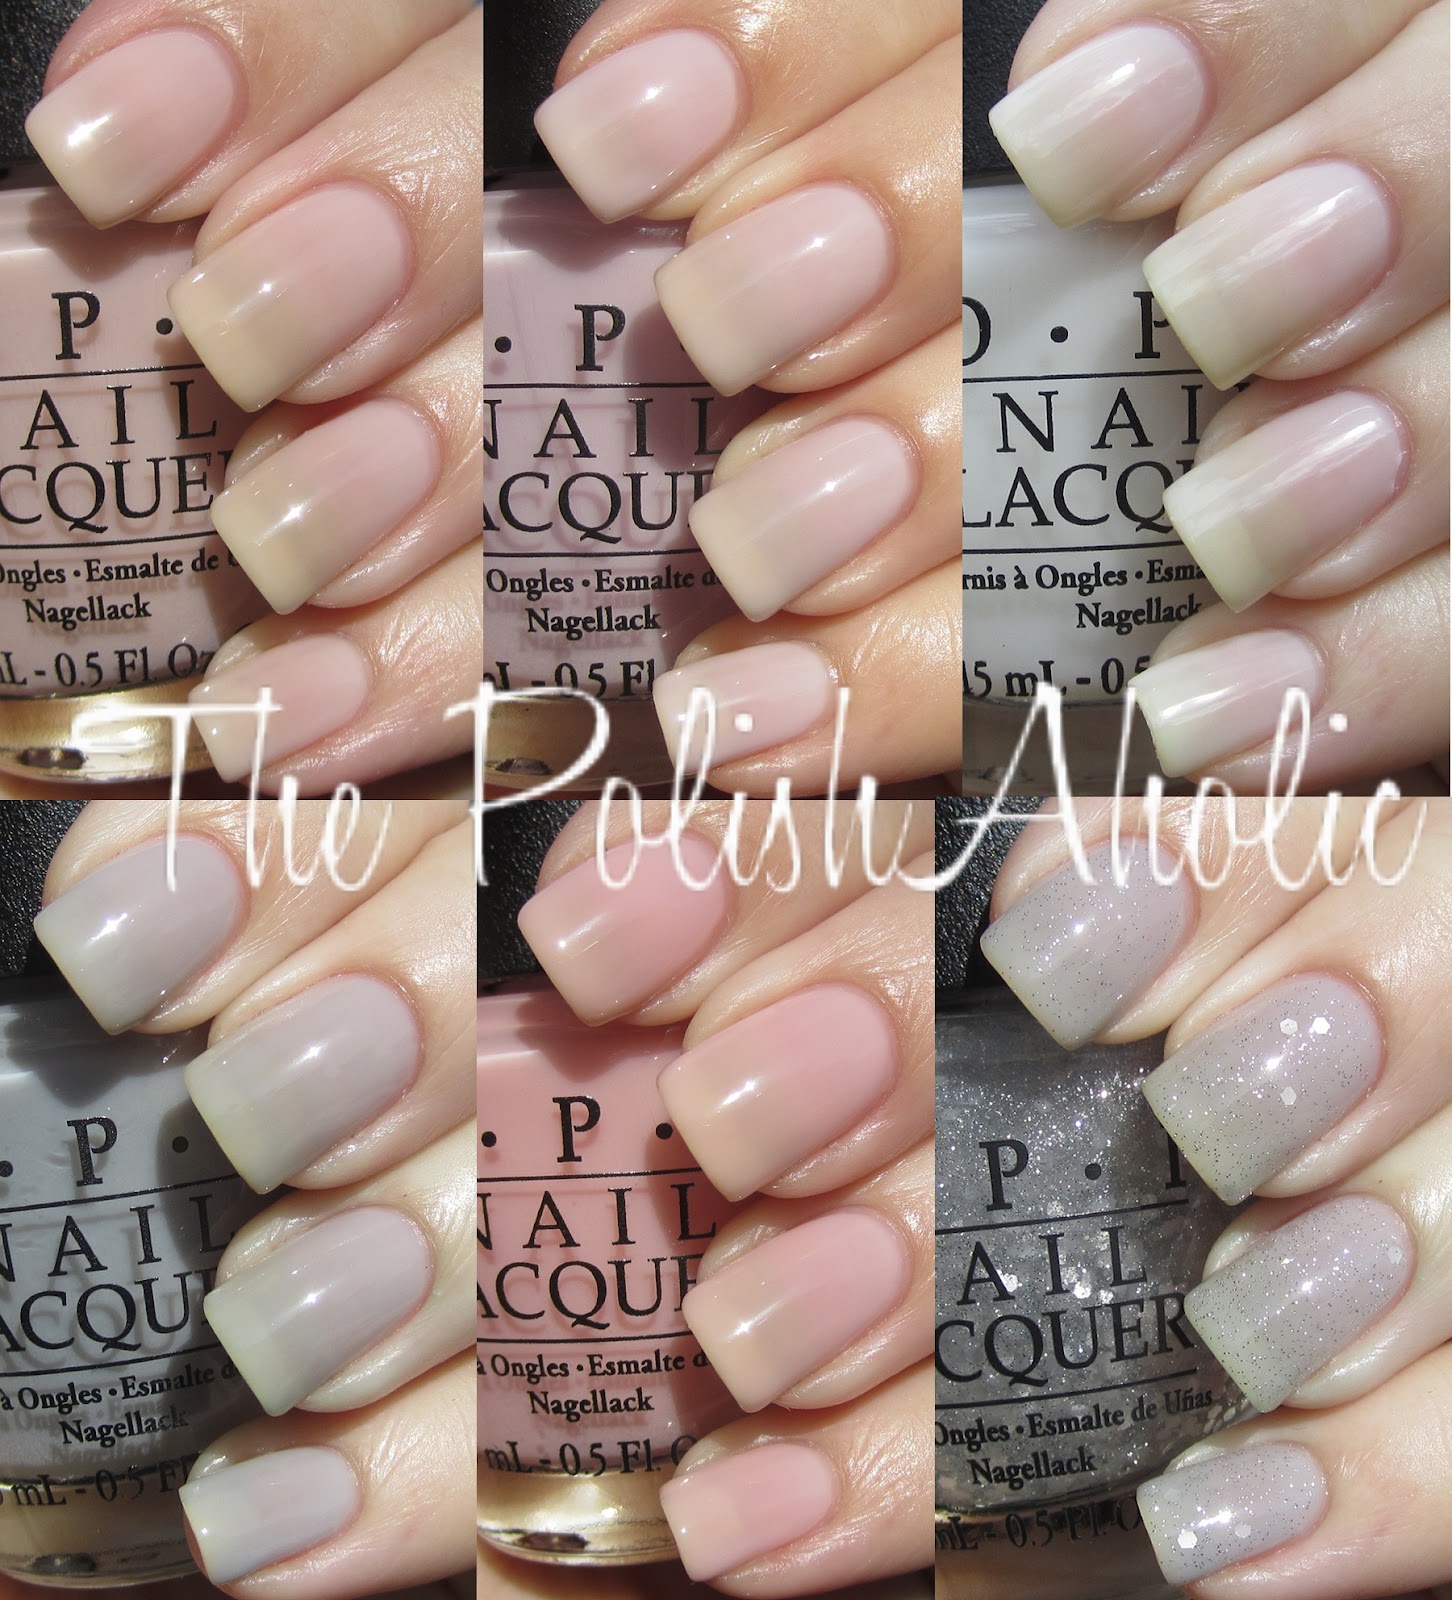 The PolishAholic: OPI NYC Ballet Soft Shades 2012 Collection Swatches!